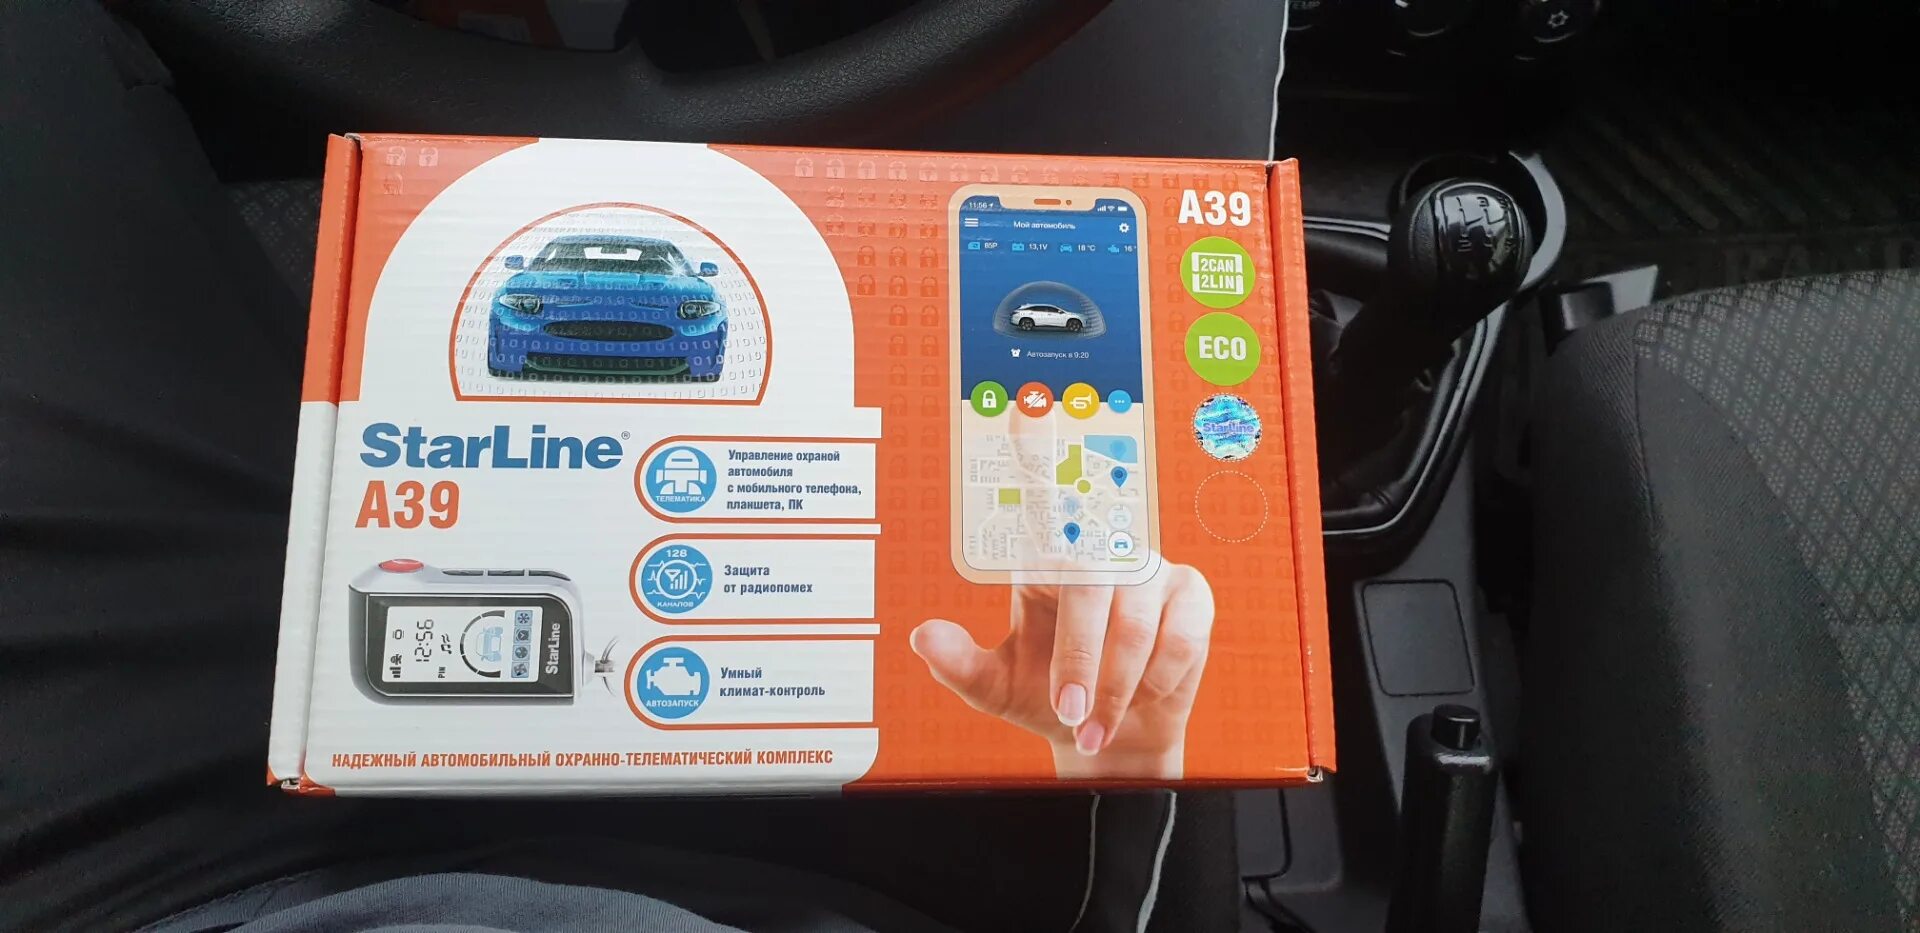 Starline a93 2can gsm. STARLINE a39. Старлайн а39 2can+2lin. STARLINE a39 комплектация. А39 2can+2lin GSM.